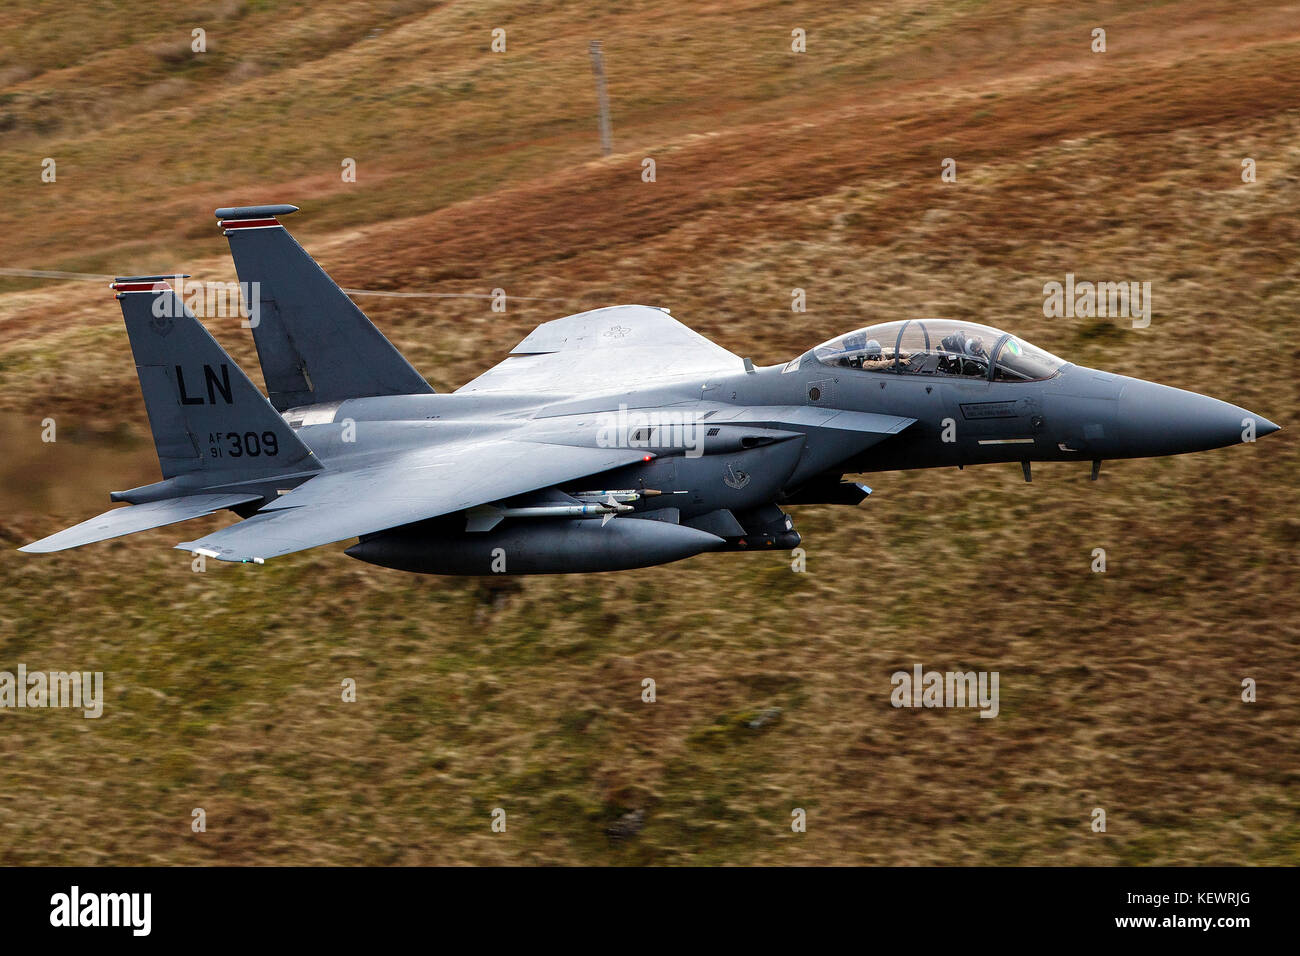 United States Air Force McDonnell-Douglas F-15E Strike Eagle (LN 91-309) from the 48th Fighter Wing, 494th Fighter Squadron based at RAF Lakenheath, England, flies low level through the Mach Loop, Machynlleth, Wales, United Kingdom Stock Photo